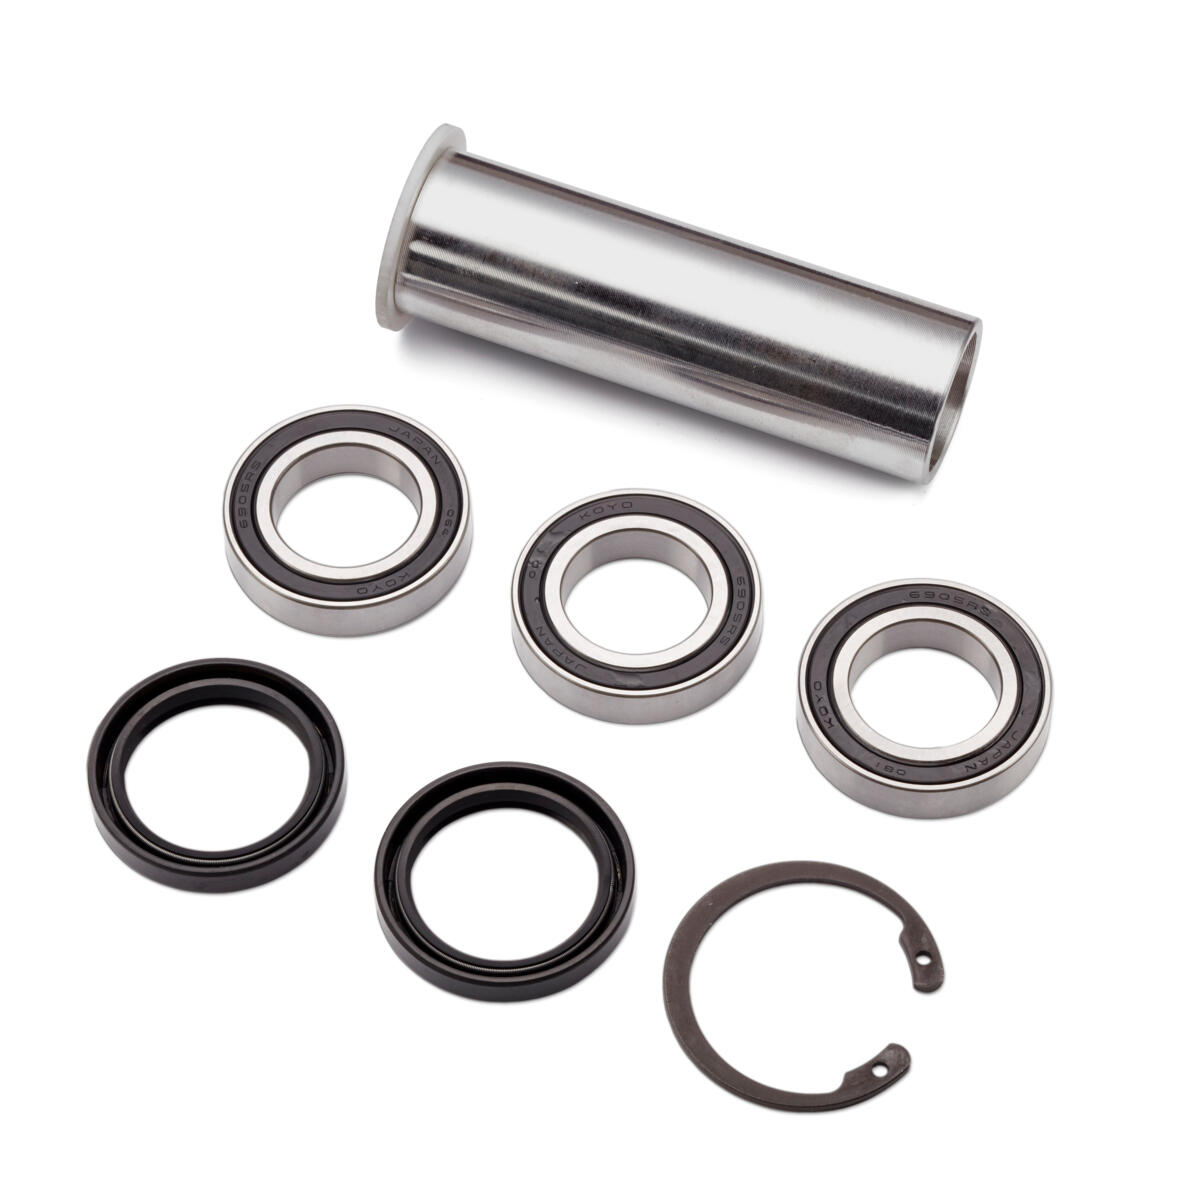 Complete replacement kit including seal closed KOYO bearings, seals, distance collar and circlip